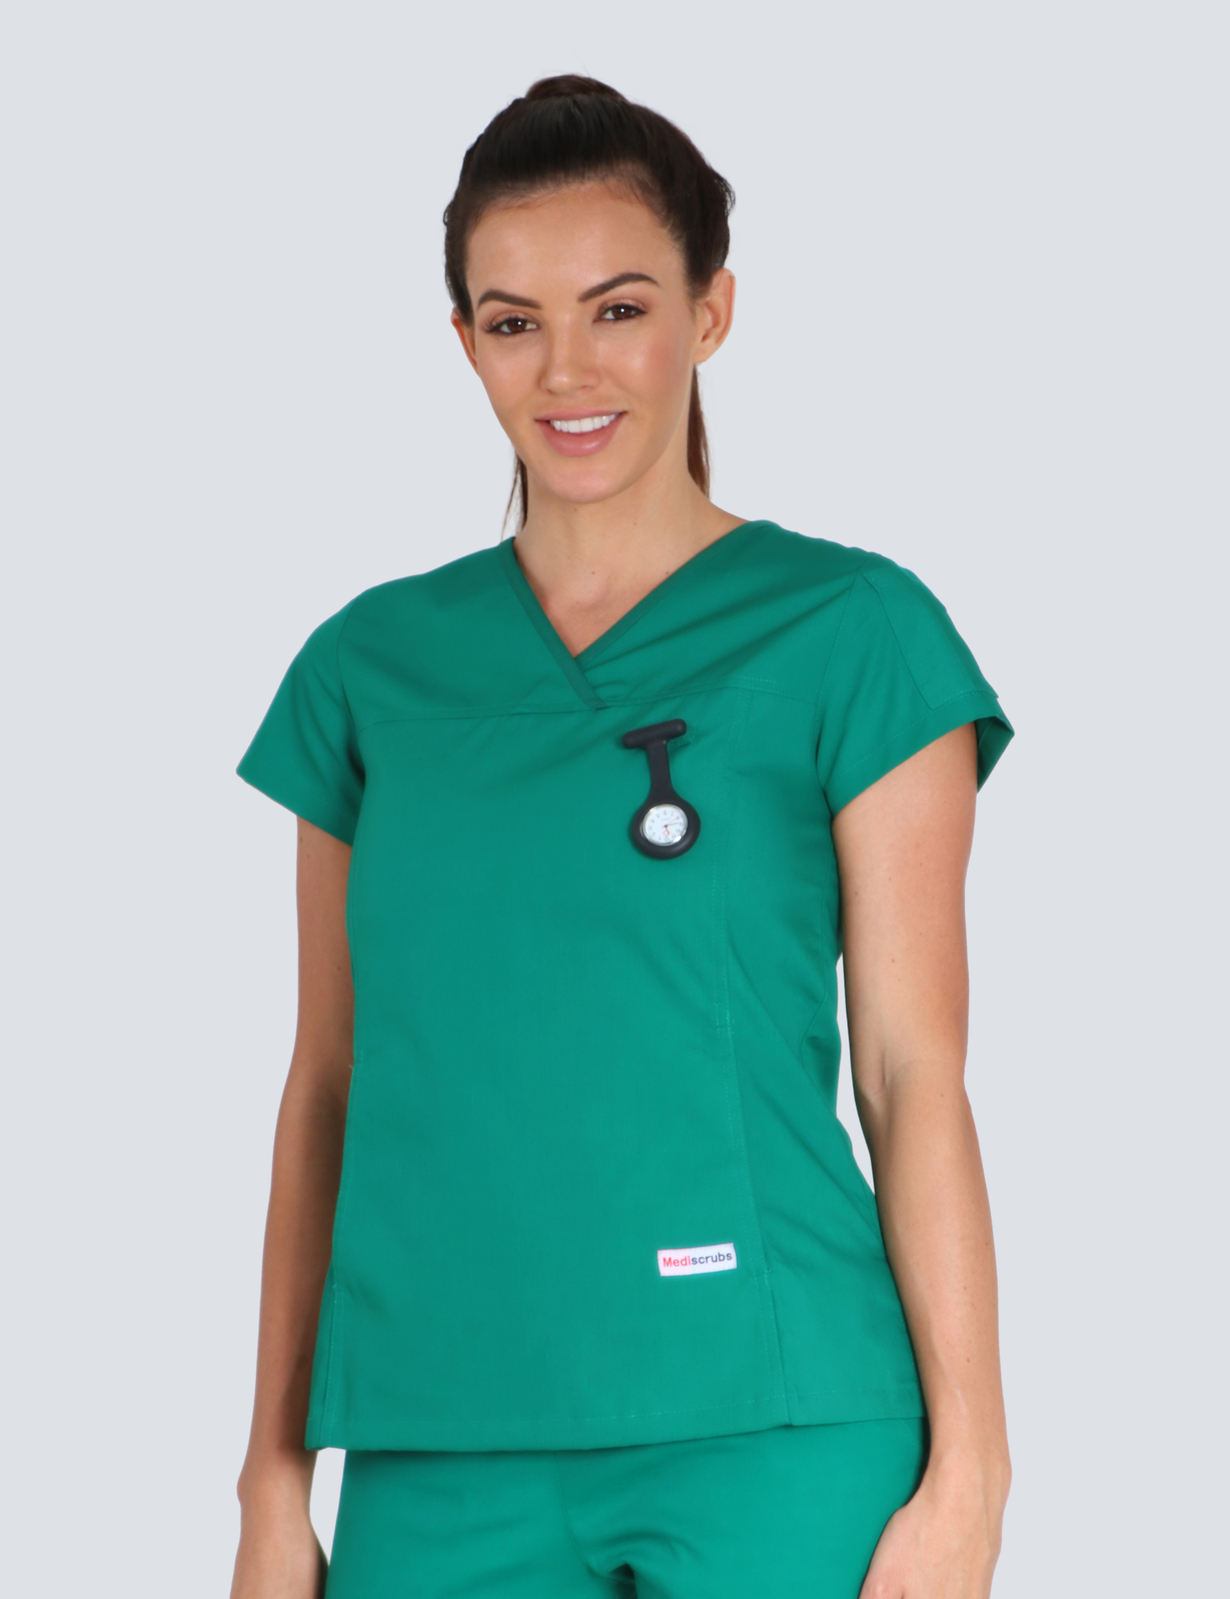 Flinders Medical Centre Emergency Department Clinical Nurse Uniform Top Only Bundle (Women's Fit Solid Top in Hunter incl Logos)